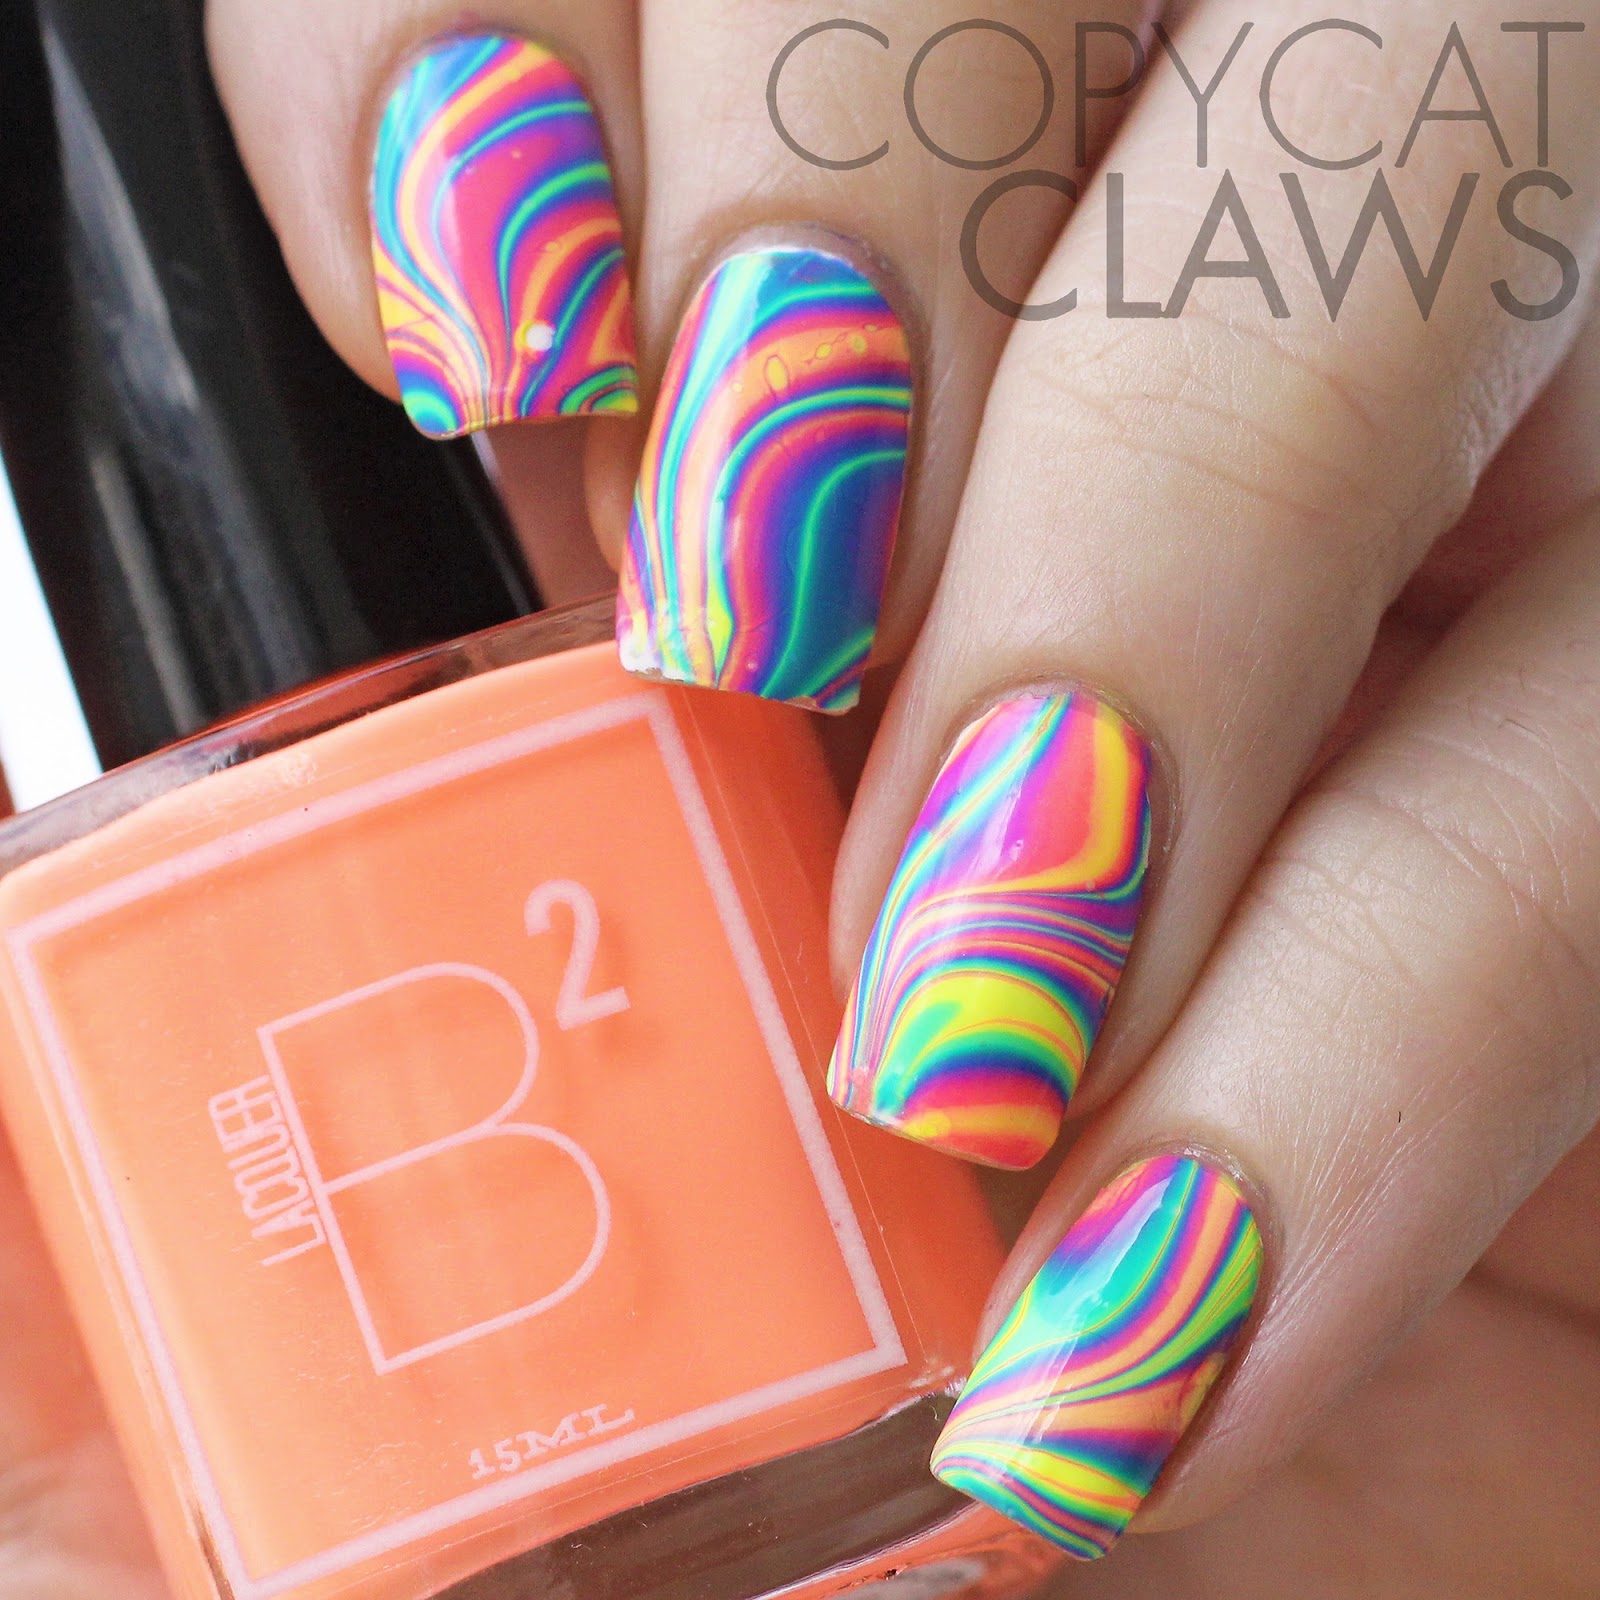 Copycat Claws: Water Marble Nails with B Squared Lacquer's EDM Collex